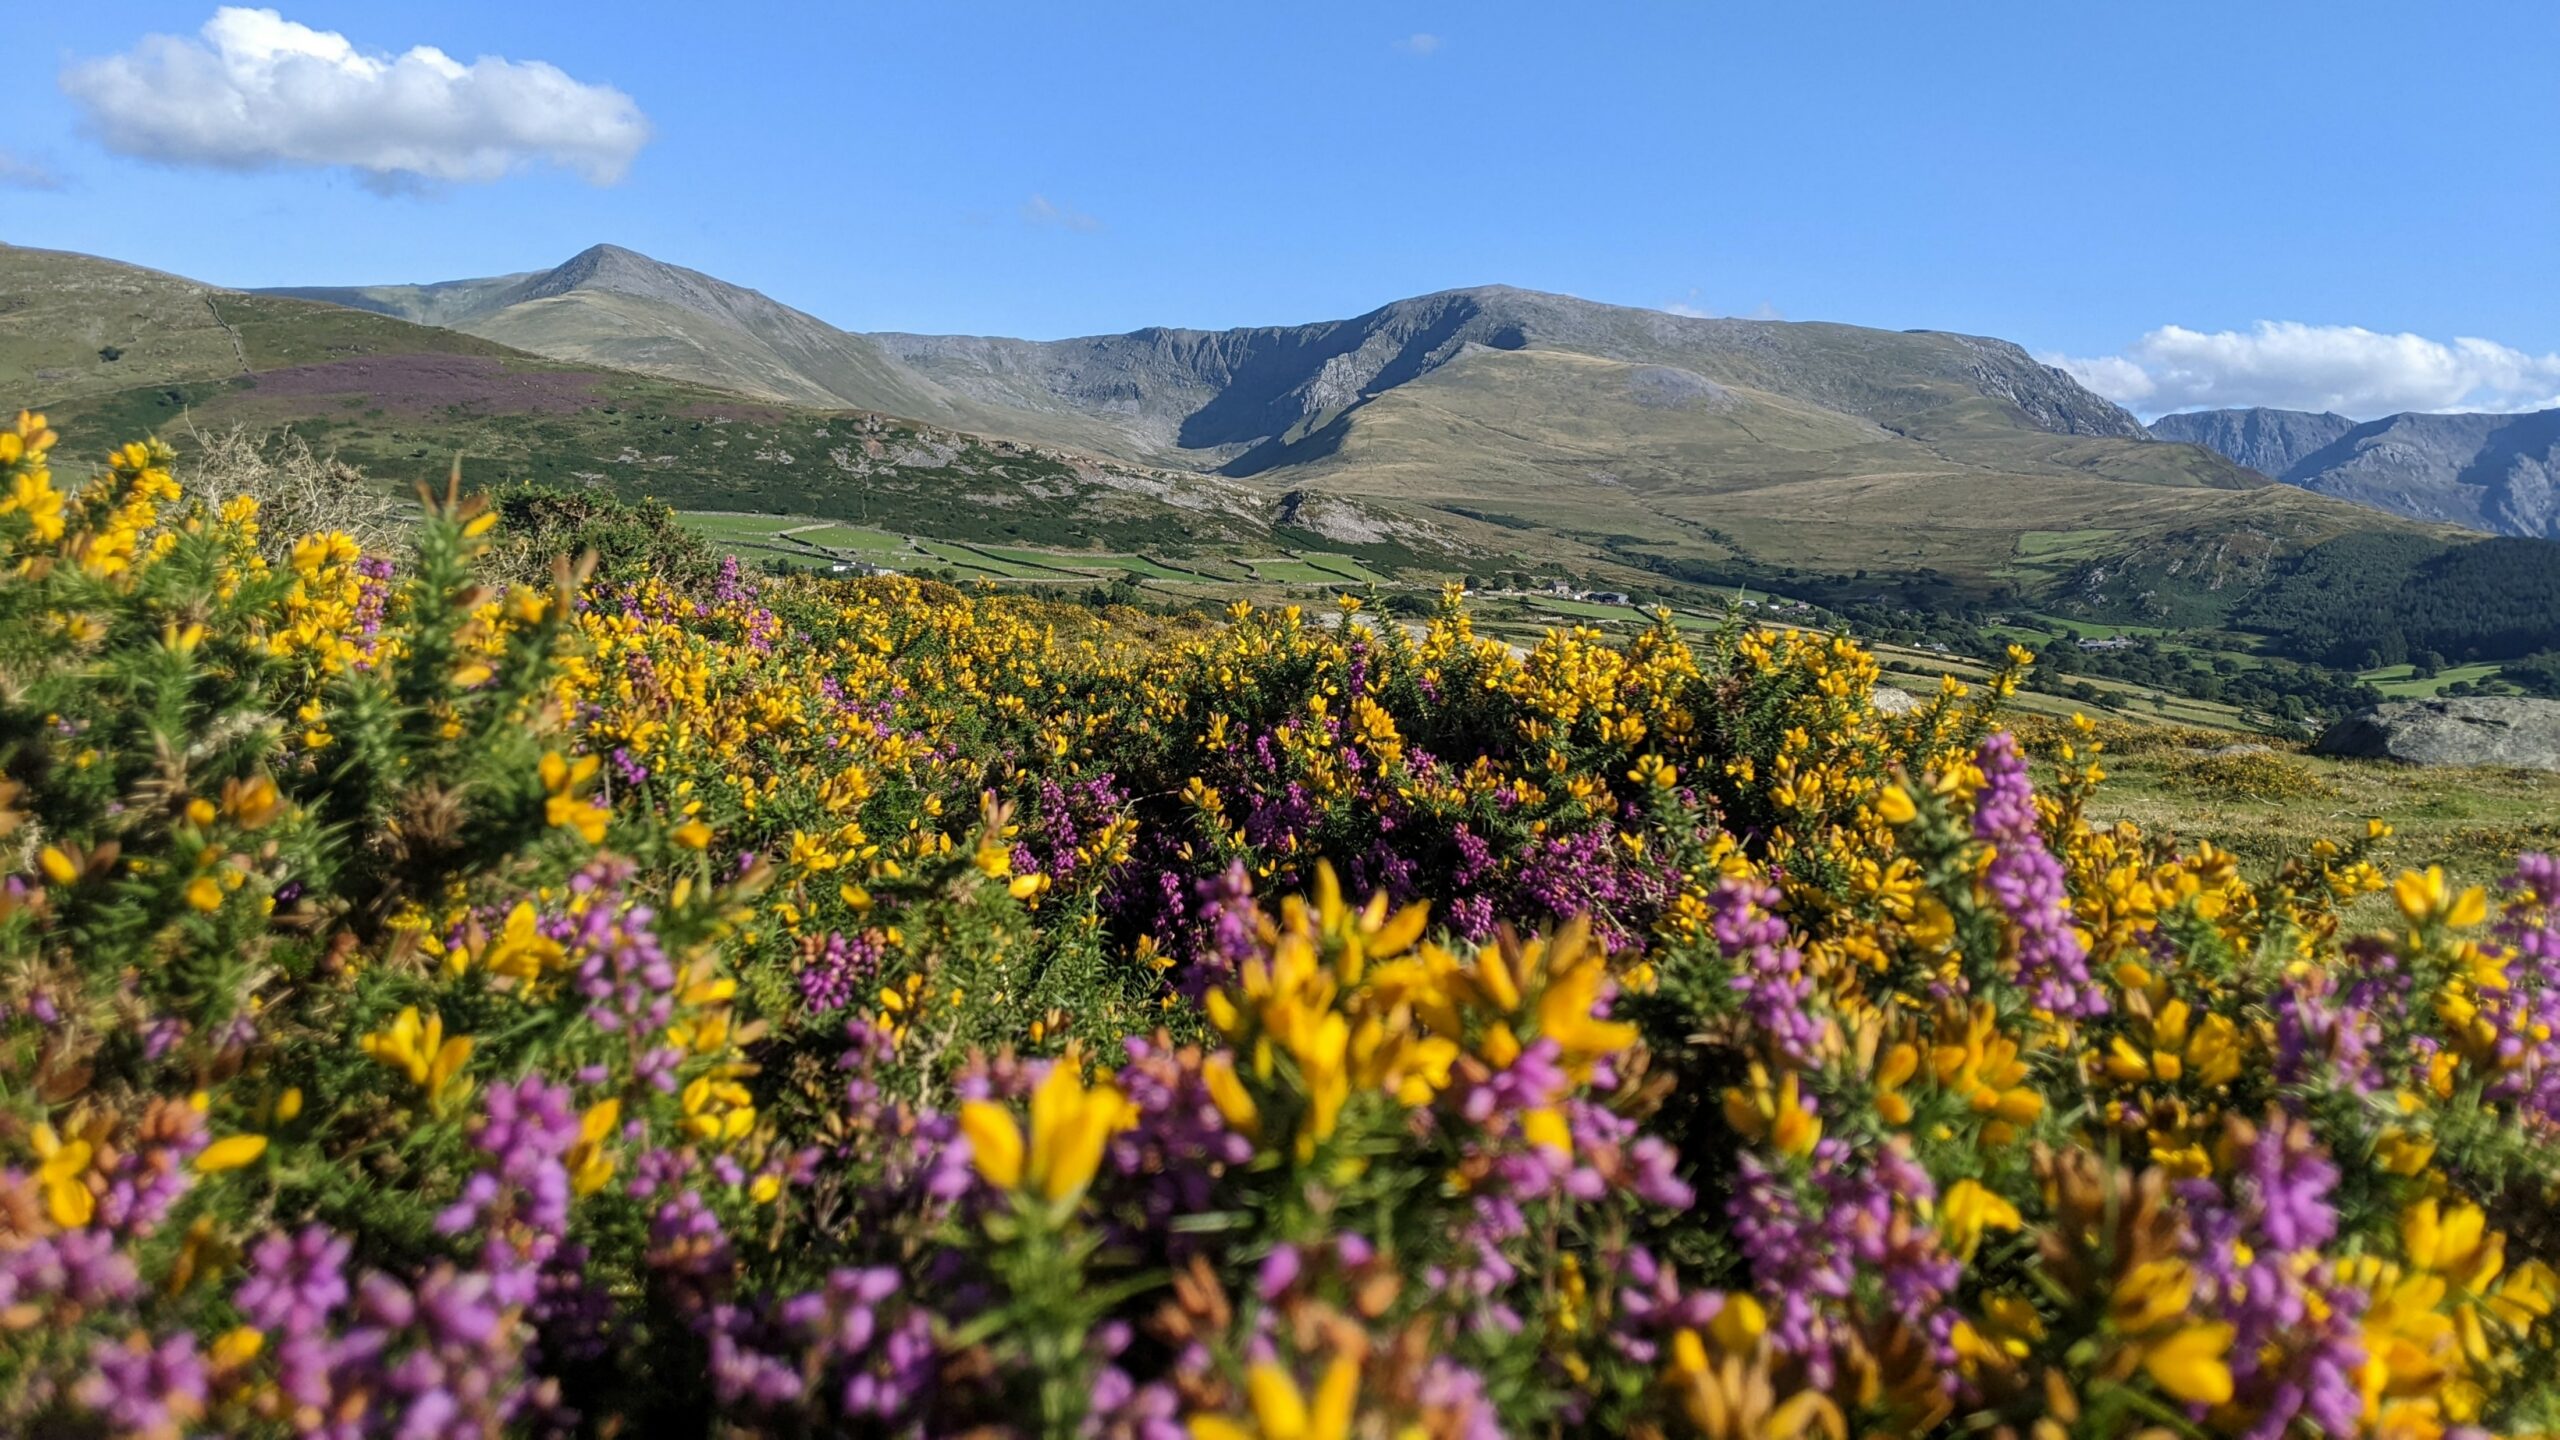 Yr Elen, Carnedd Dafydd and Pen Yr Ole Wen in the background with gorse and heather in the foreground